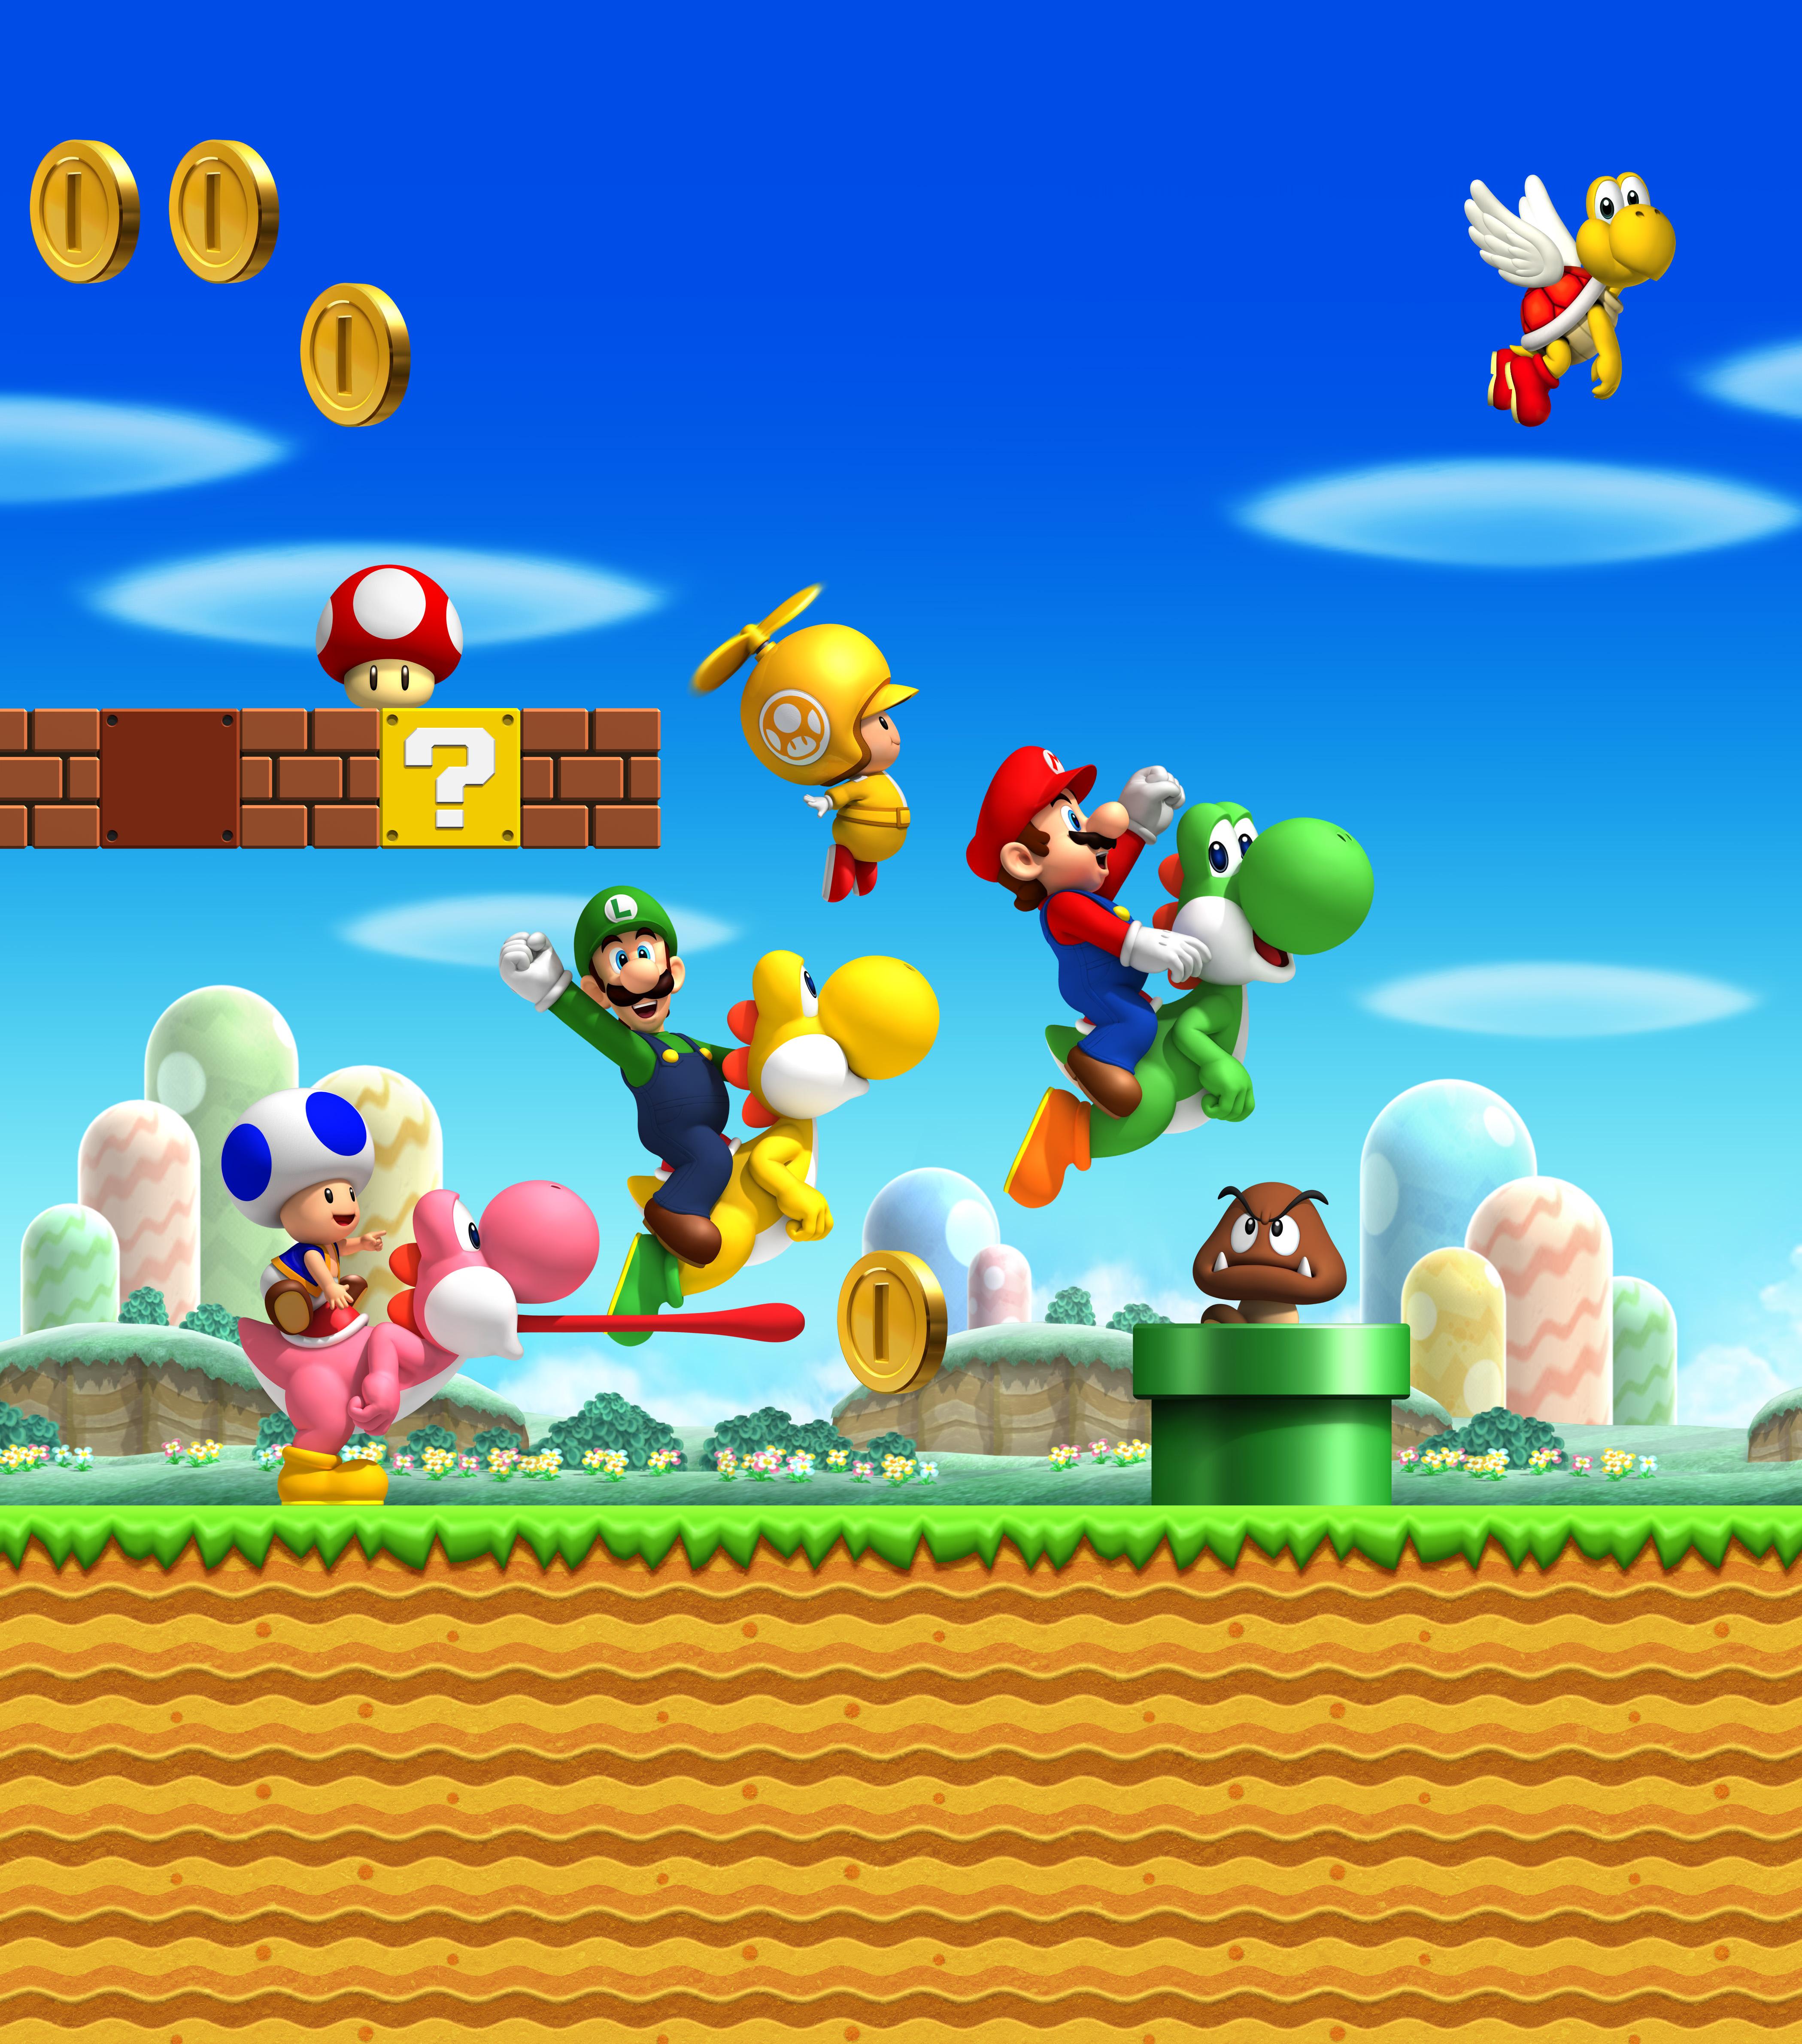 New Super Mario Bros (Wii) Artwork including the playable characters